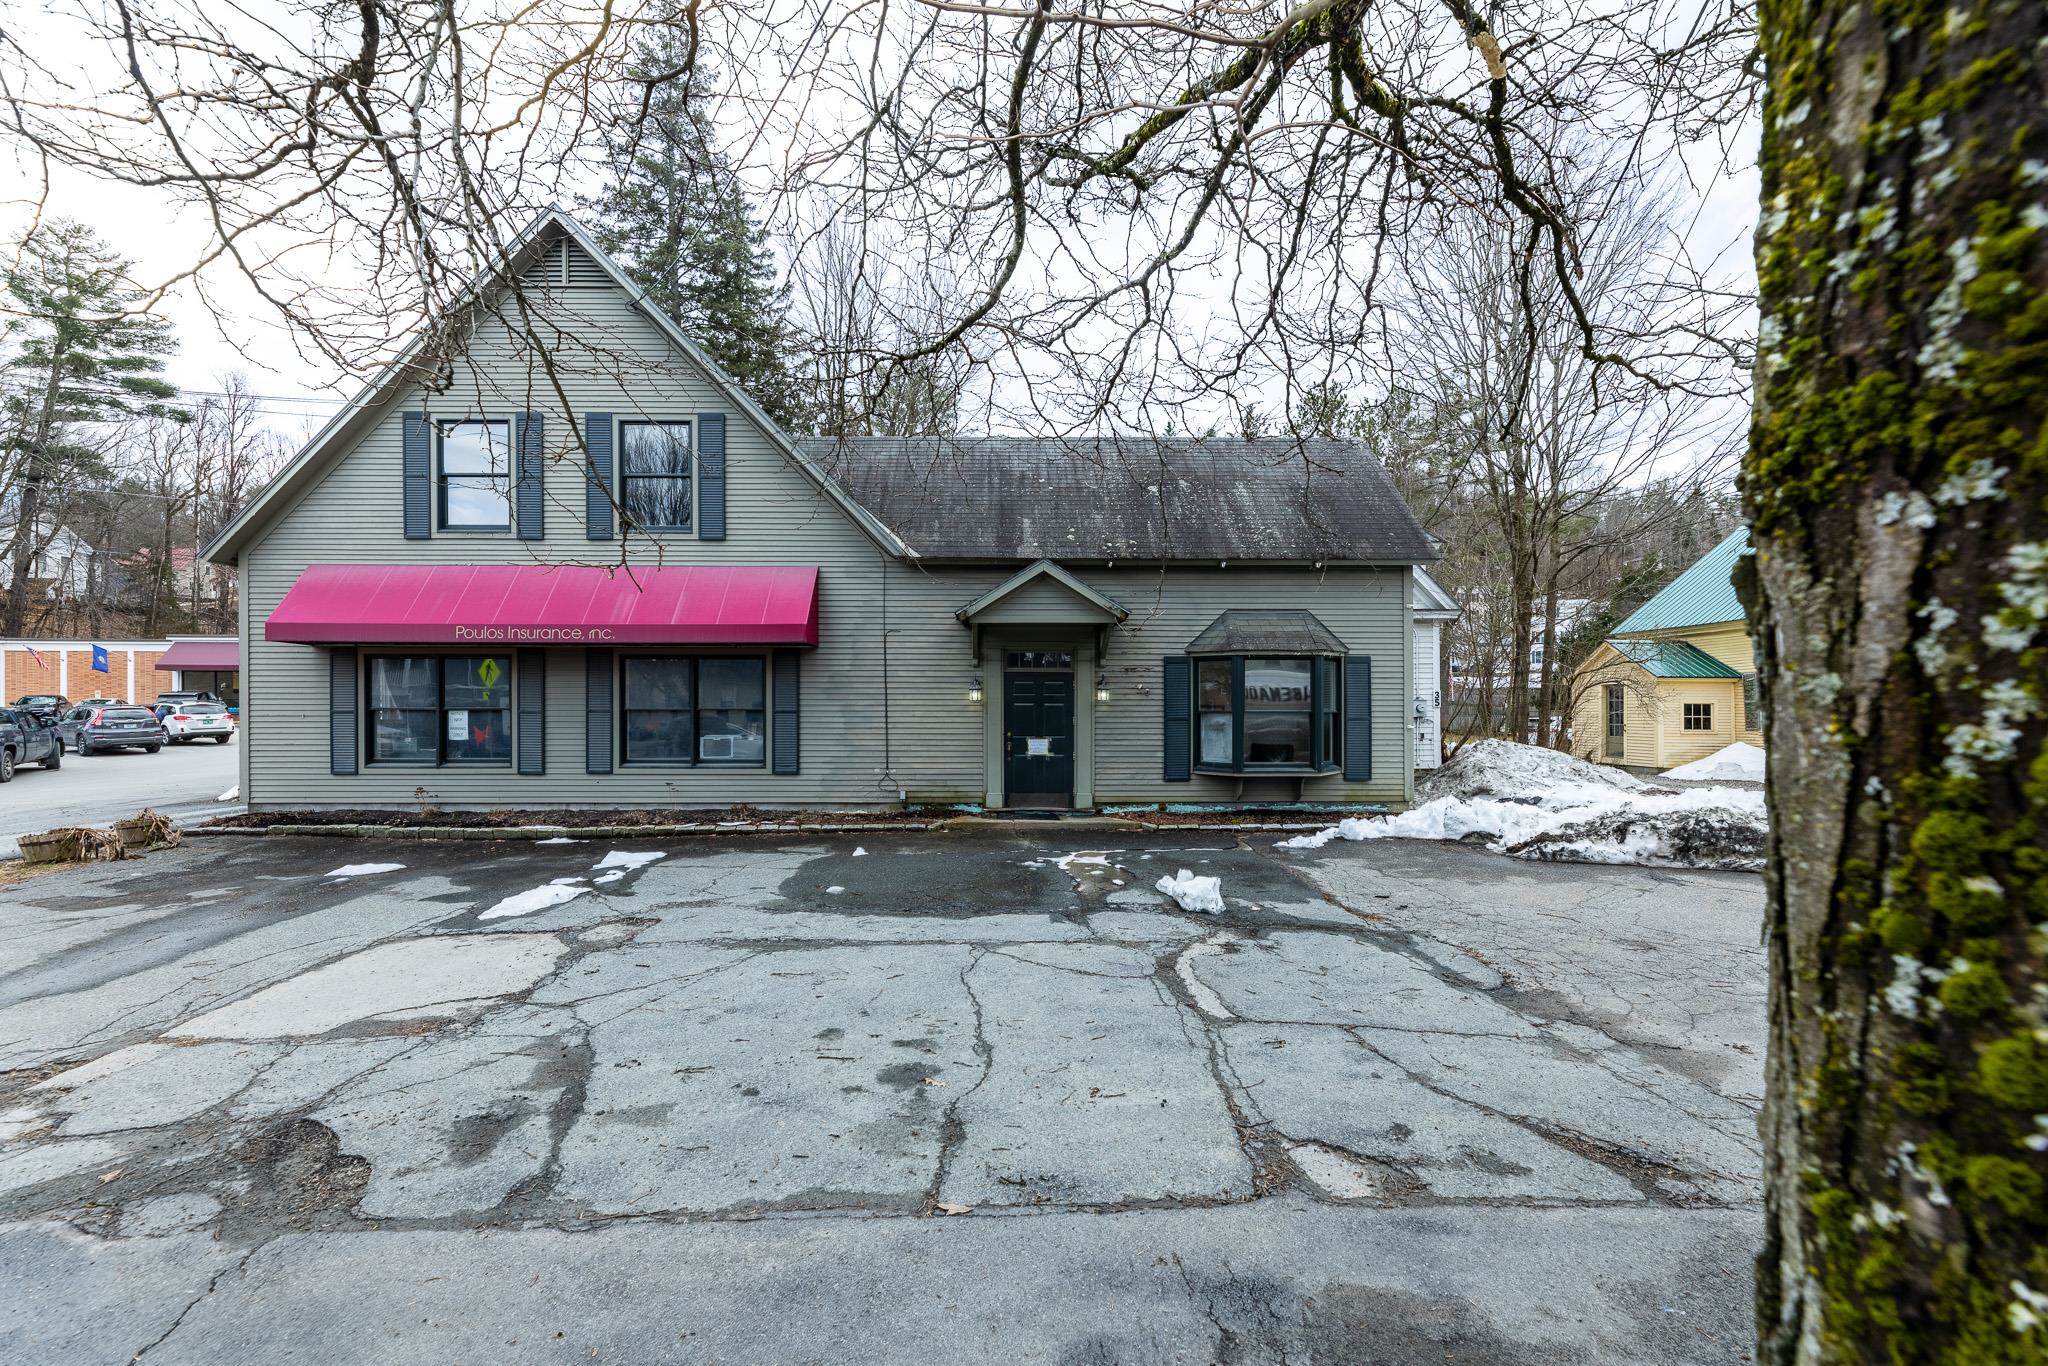 Village of Woodstock in Town of Woodstock VT Commercial Property for sale $439,000 $204 per sq.ft.